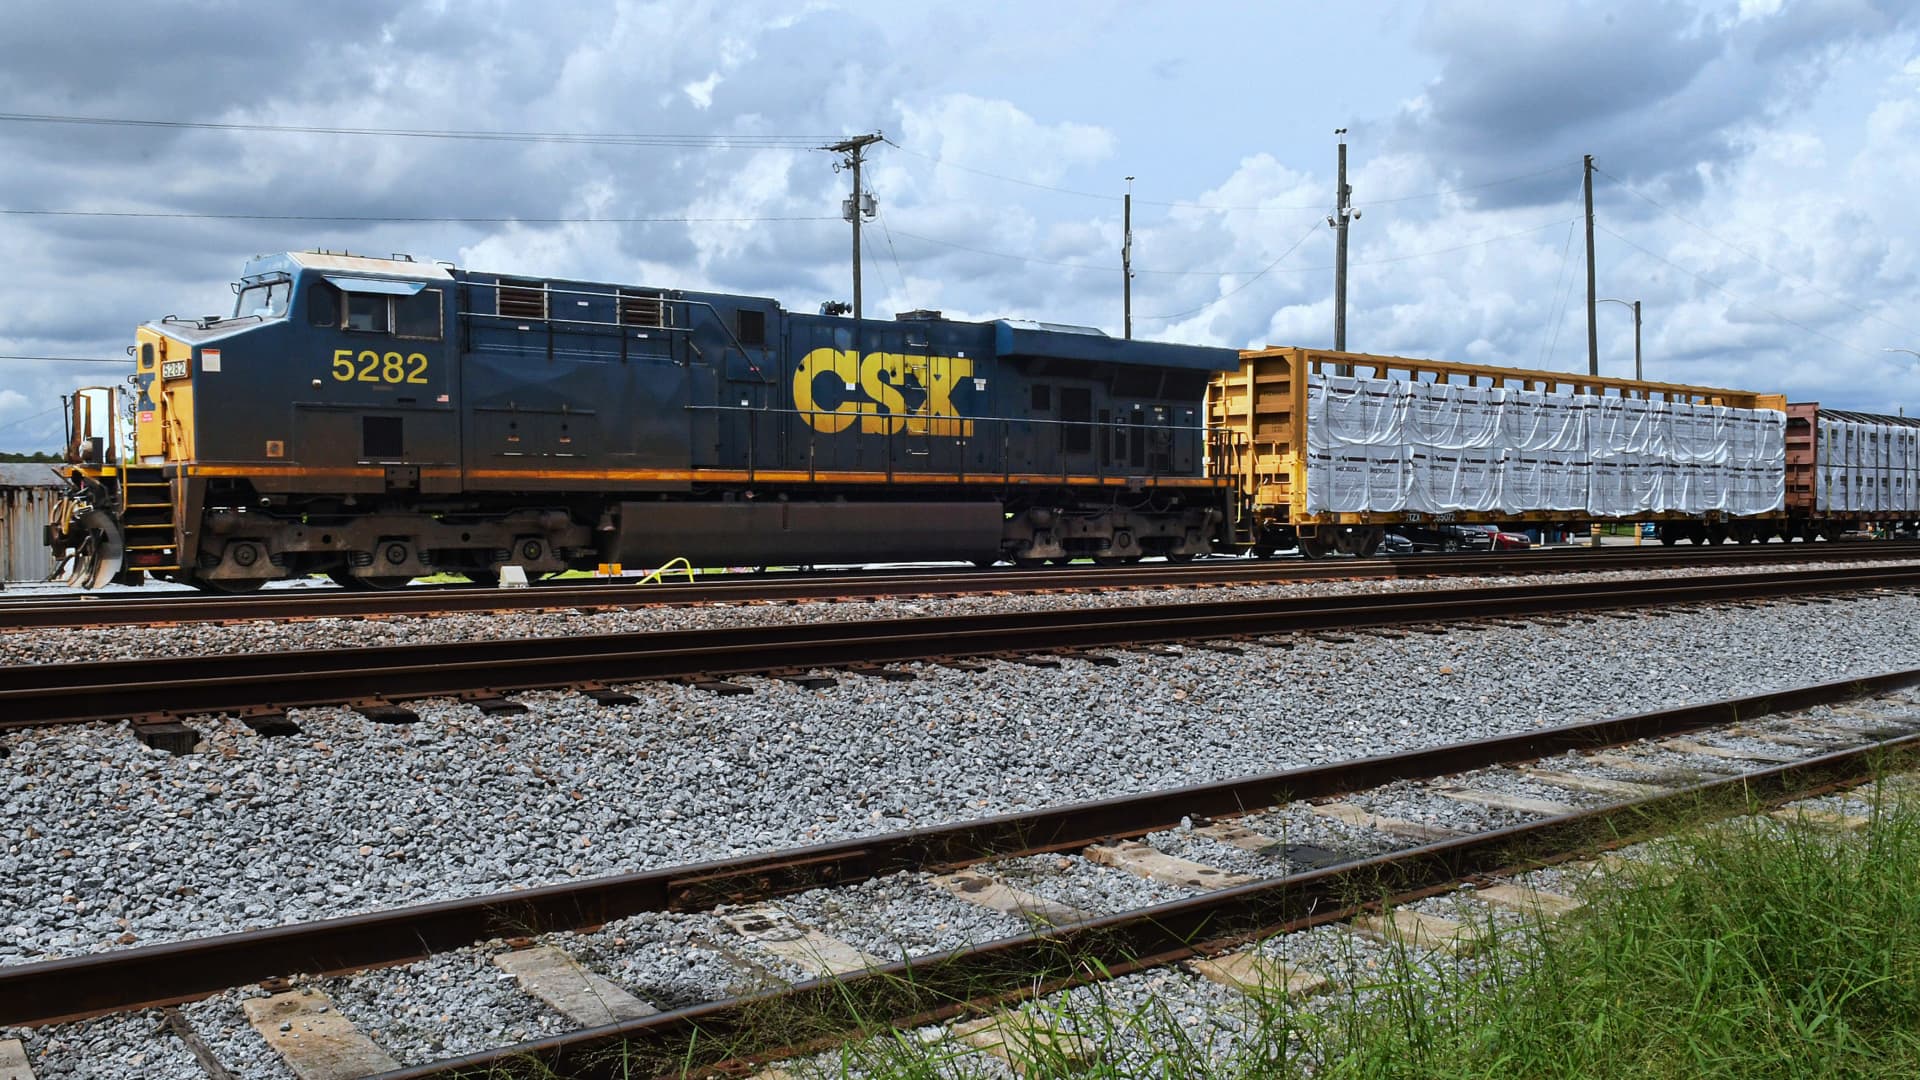 Stocks making the biggest moves after hours: CSX, PPG Industries, Knight-Swift Transportation and more